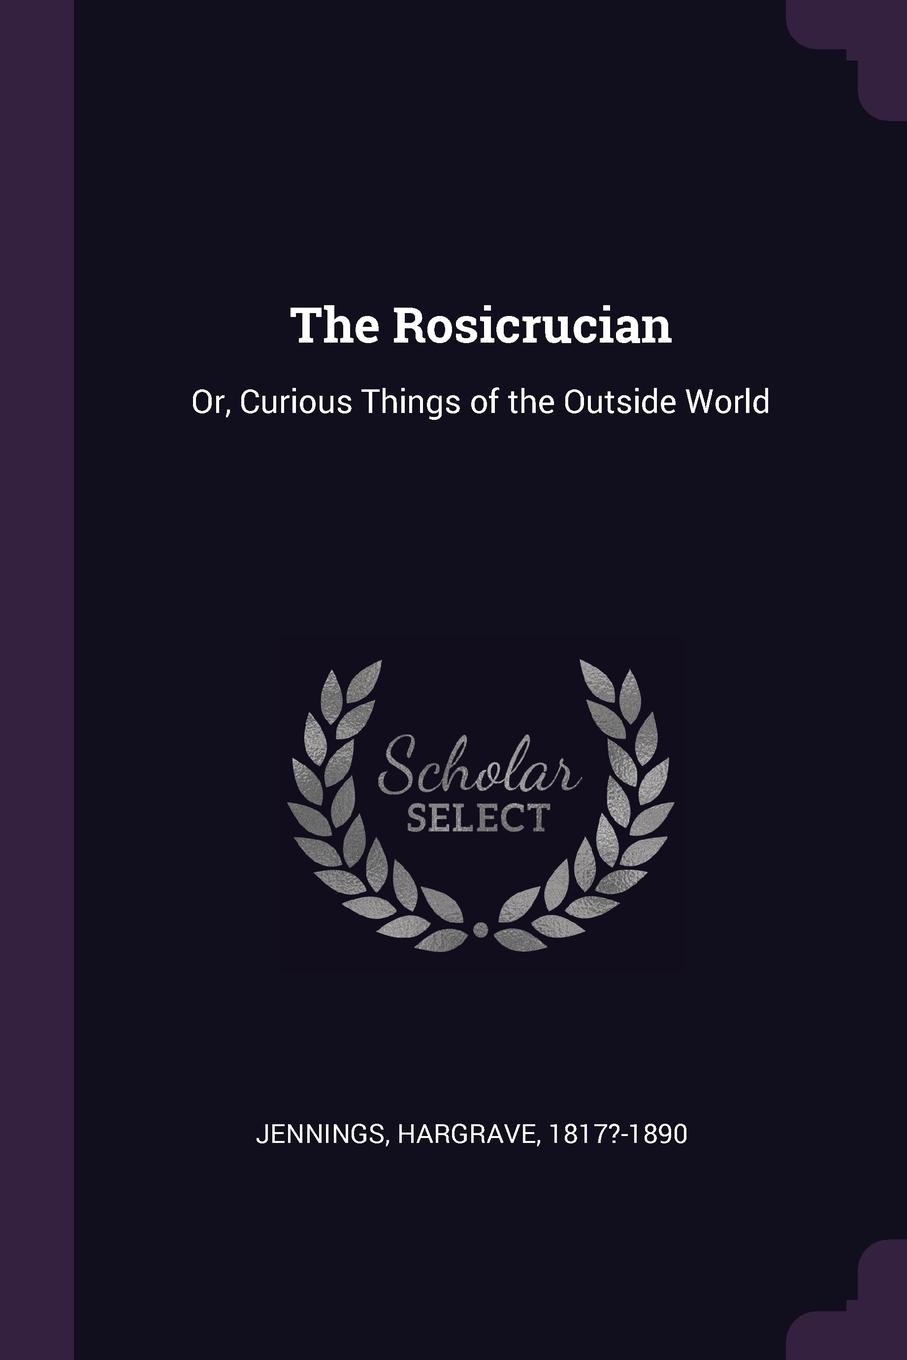 The Rosicrucian. Or, Curious Things of the Outside World